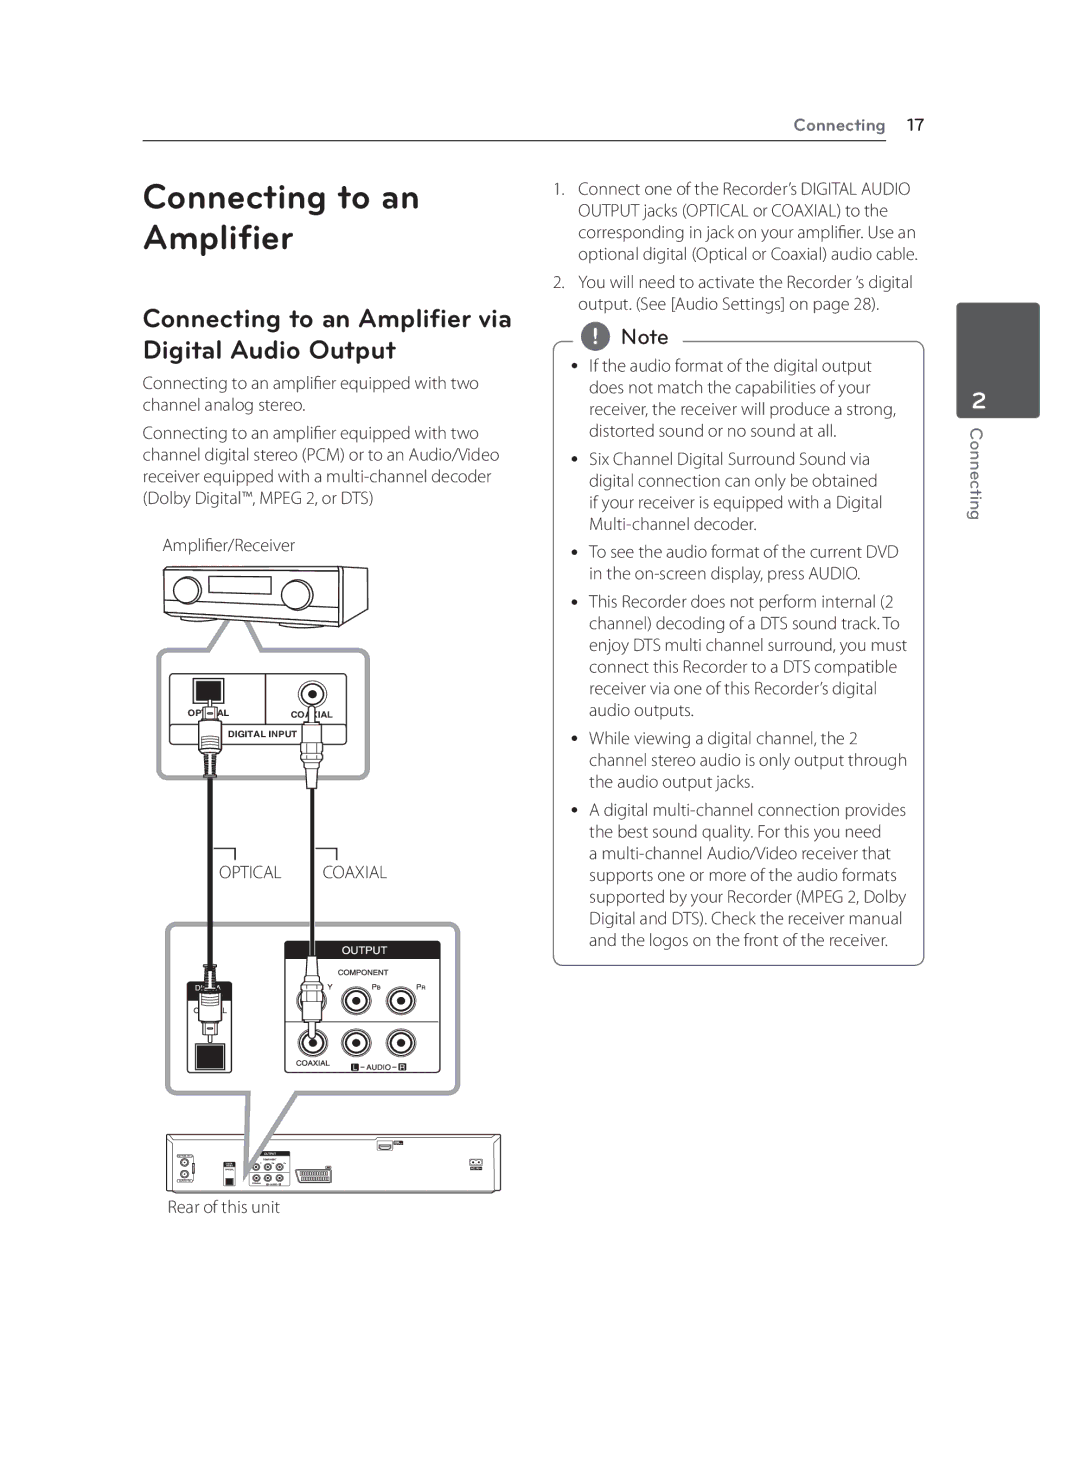 LG Electronics RCT699H owner manual Connecting to an Amplifier via Digital Audio Output, Amplifier/Receiver 